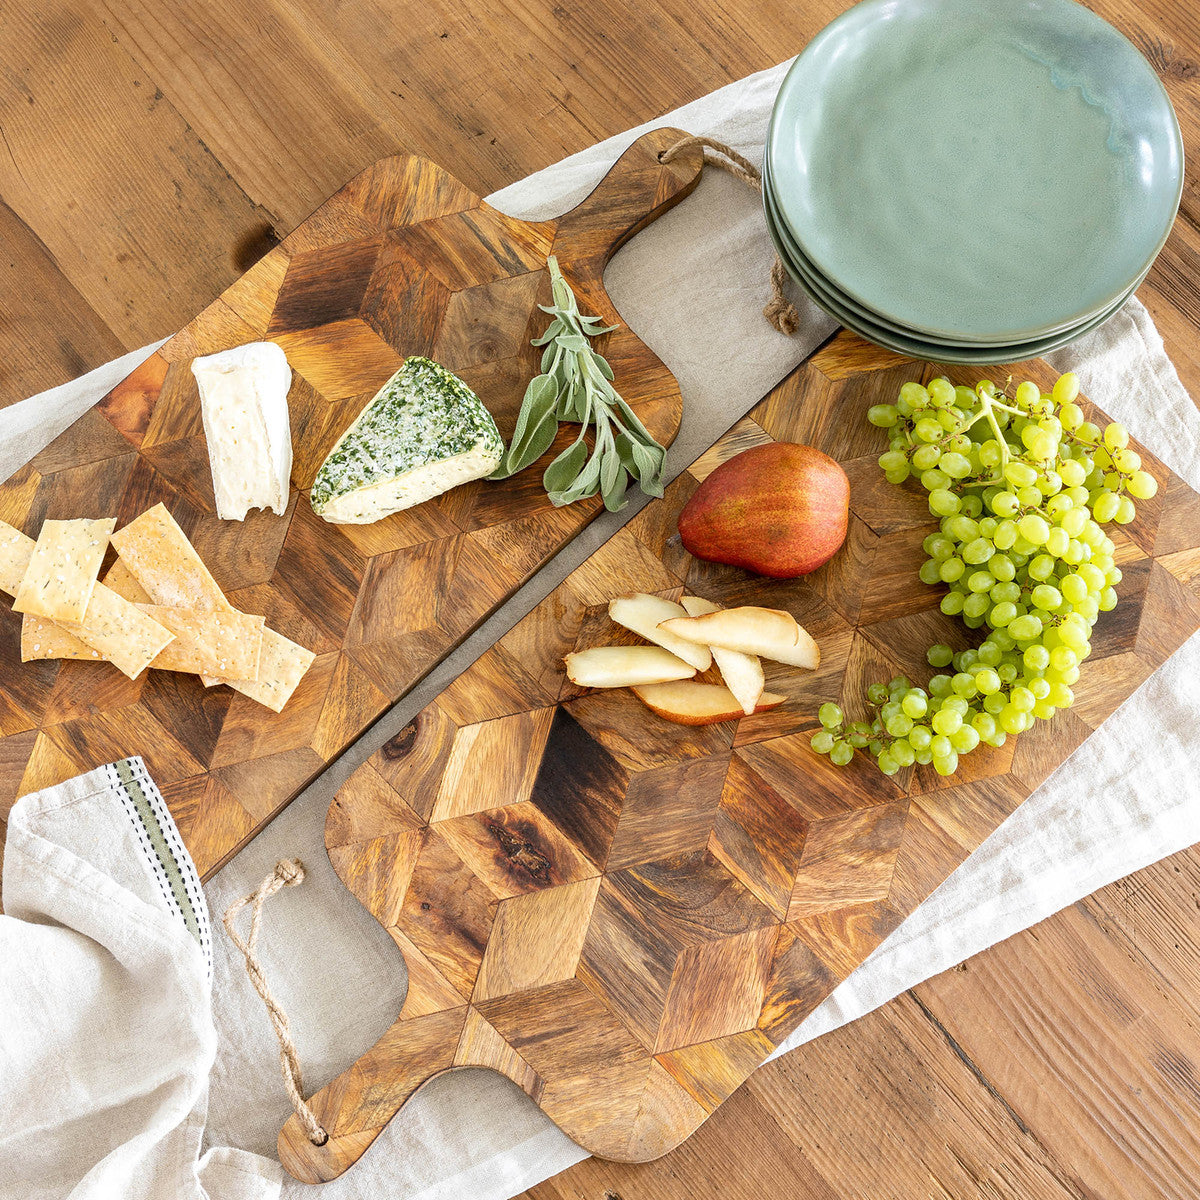 Patterned Chopping Board - Set of 2 - The Reclaimed Farmhouse